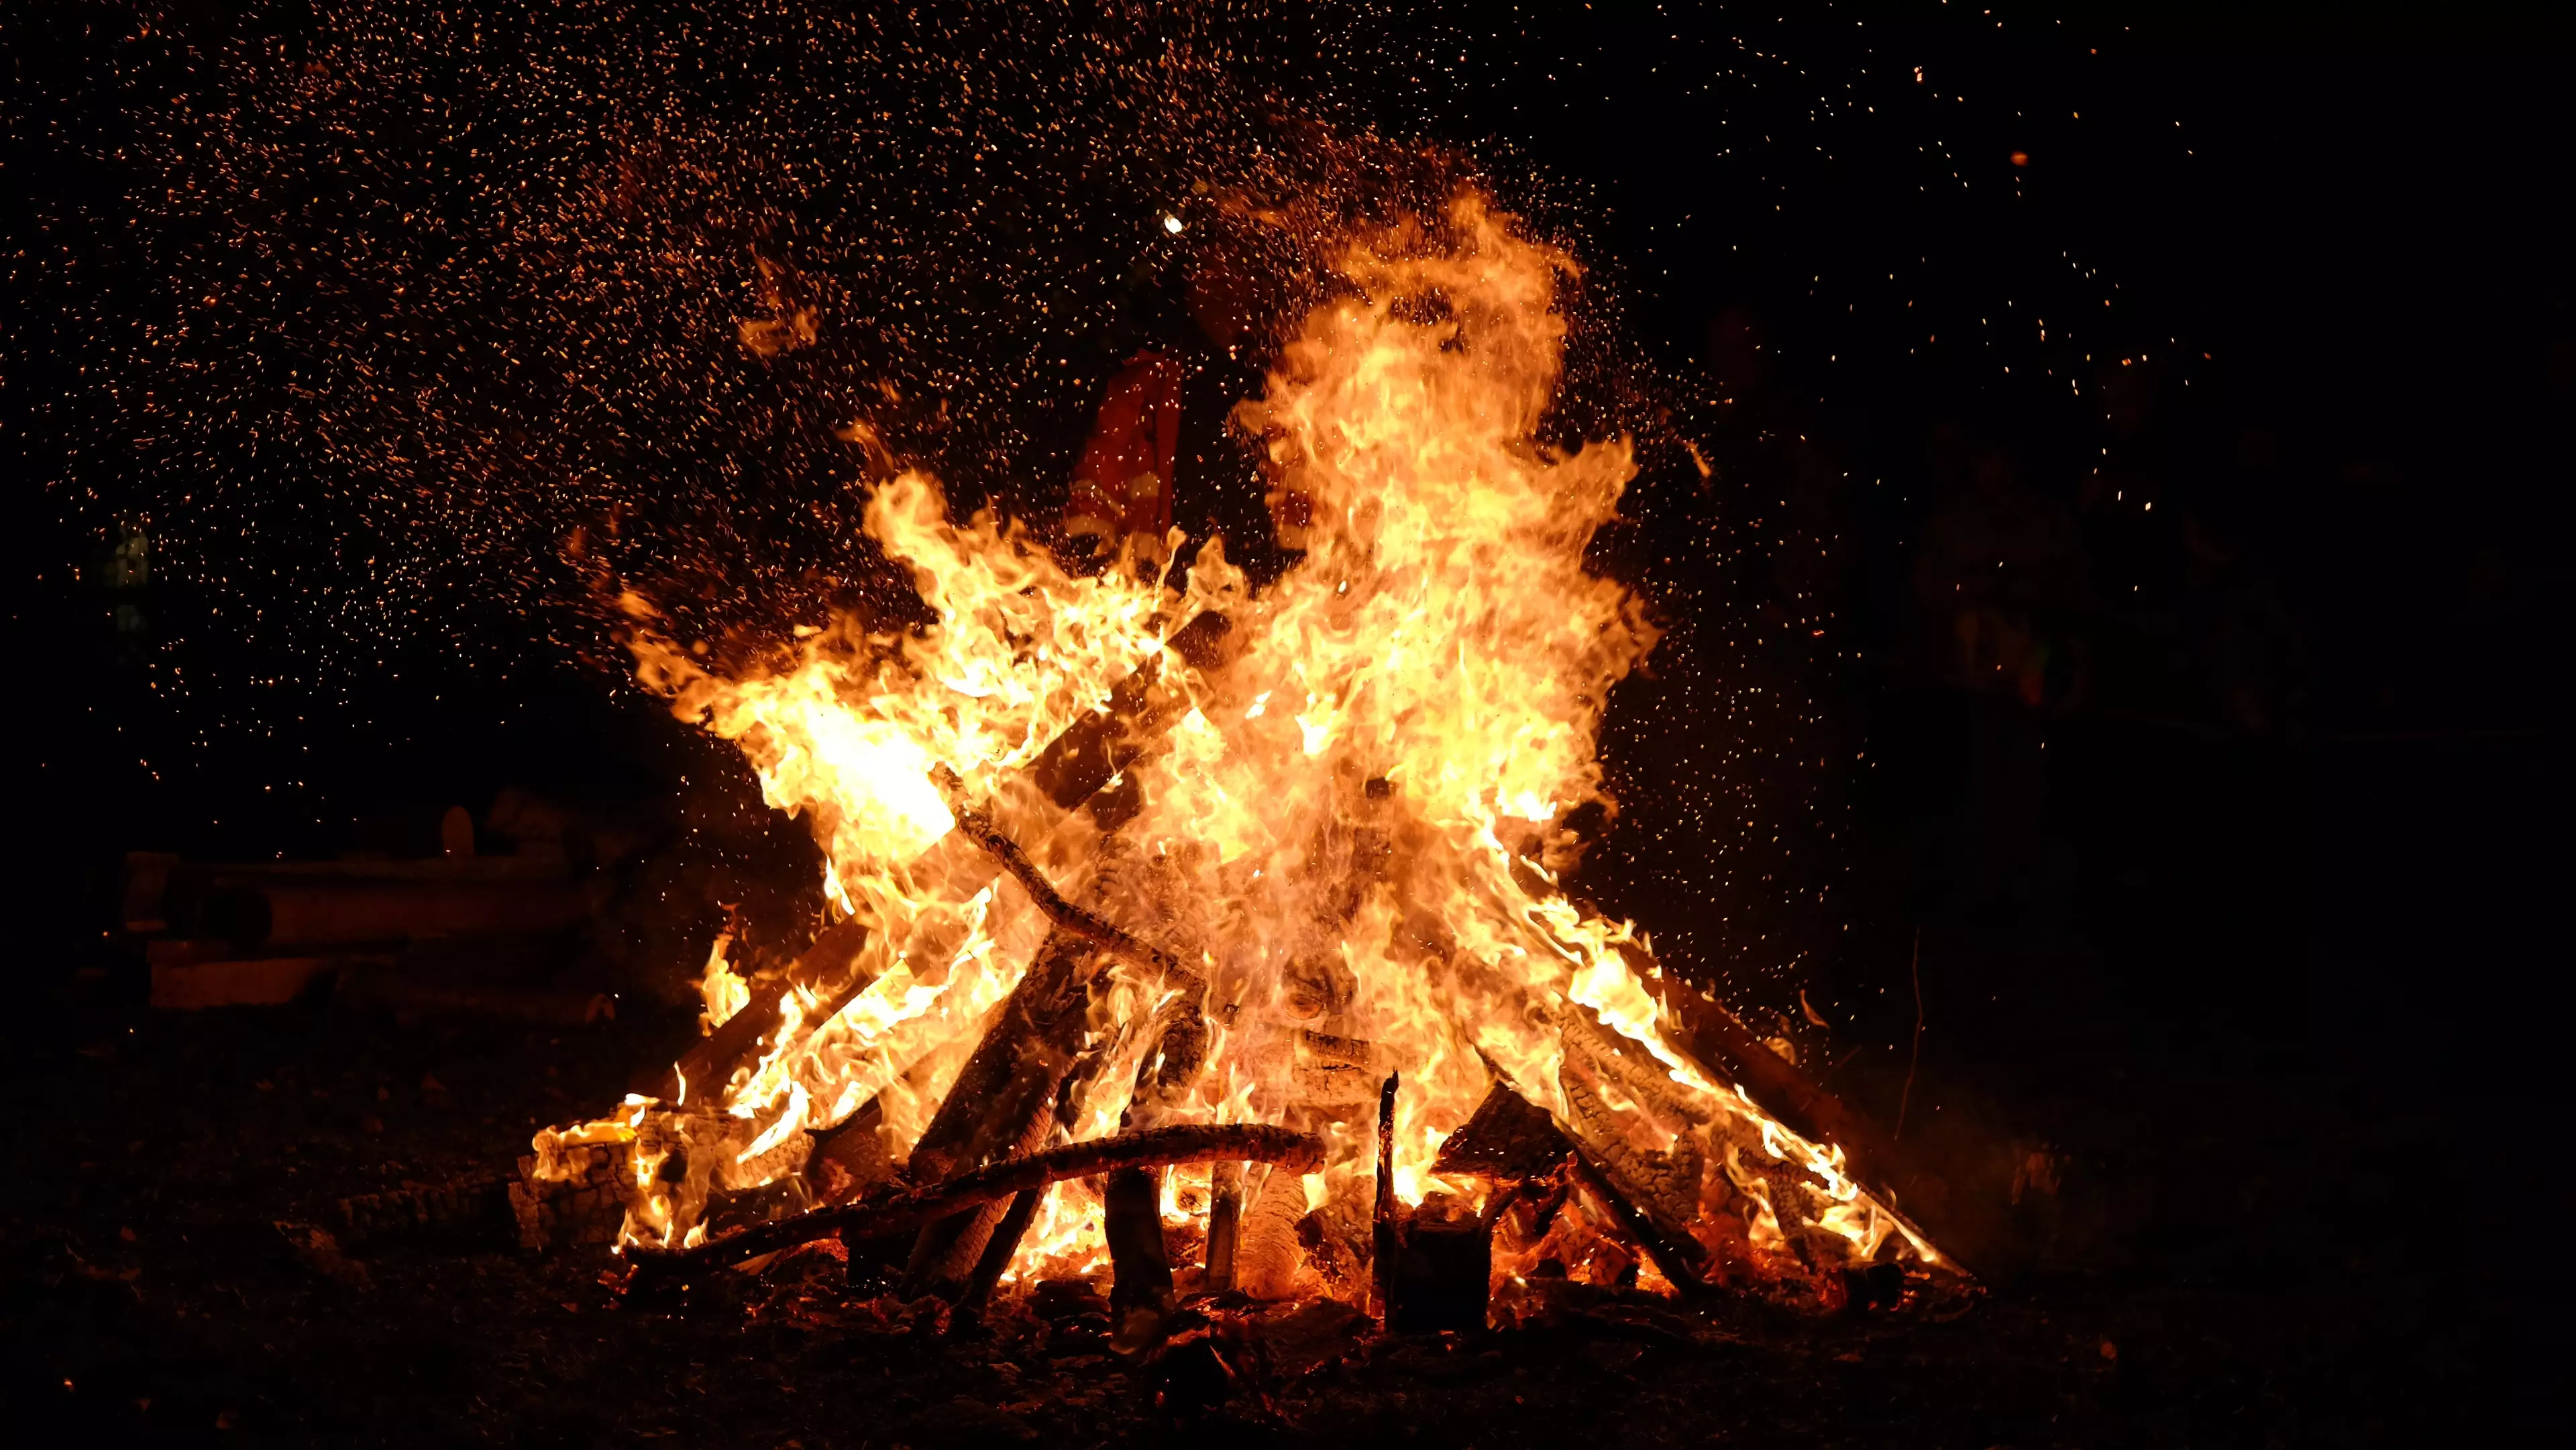 Bonfires can also kill wildlife and destroy creatures' homes.